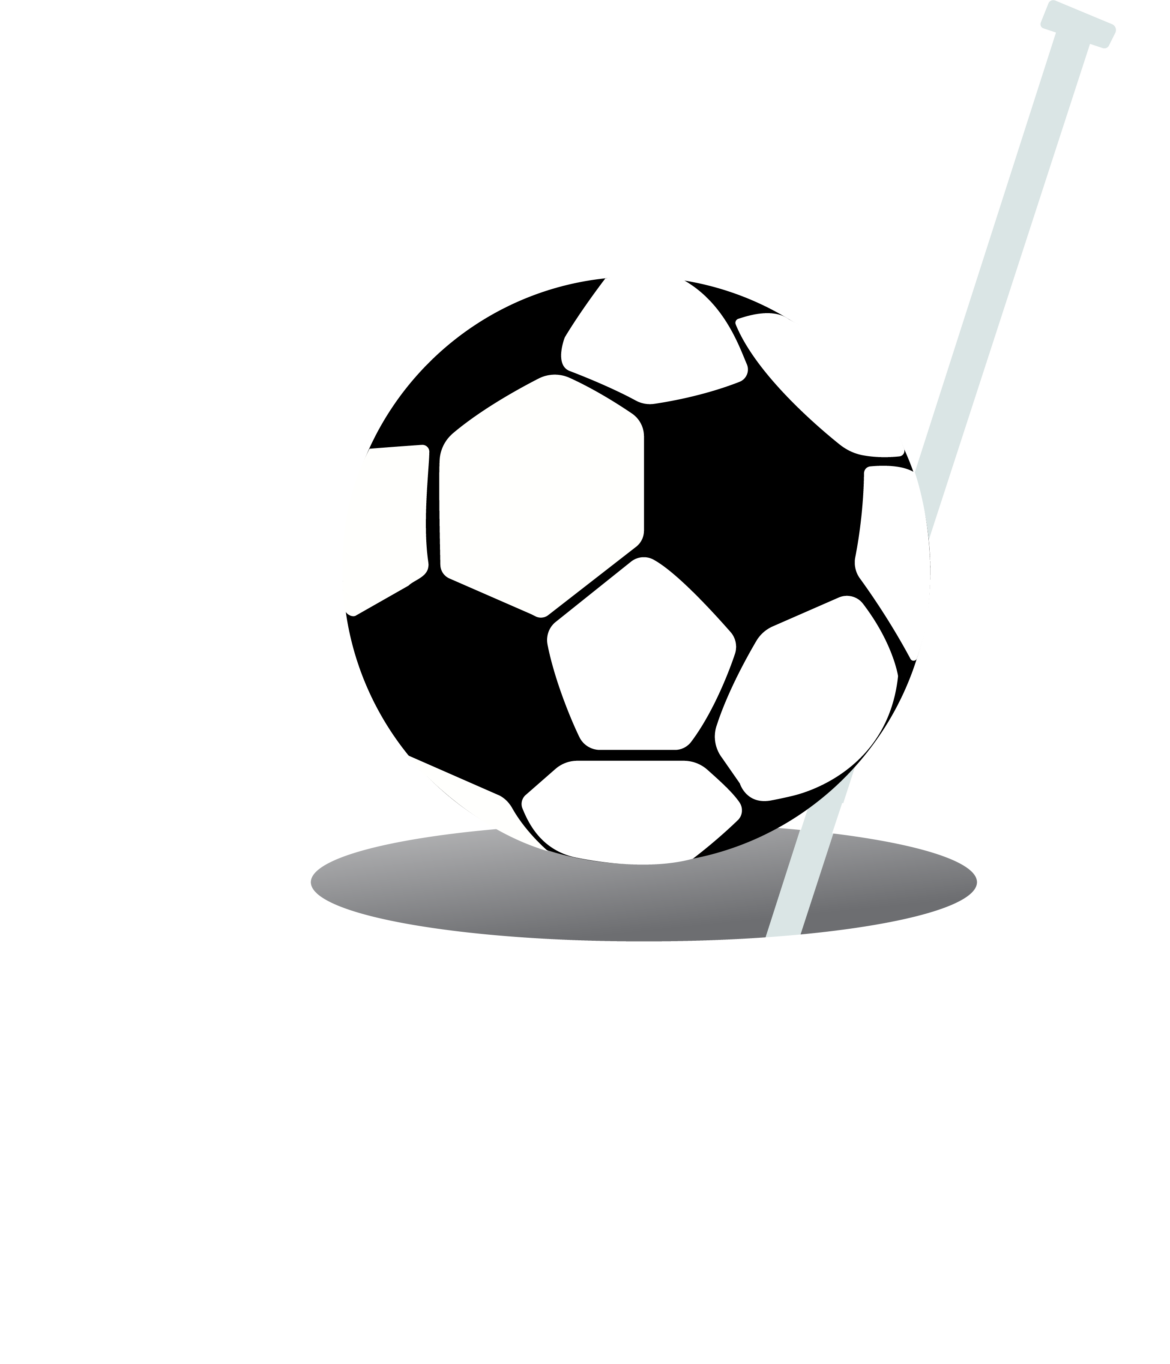 MikeFootgolf-logo-4.png